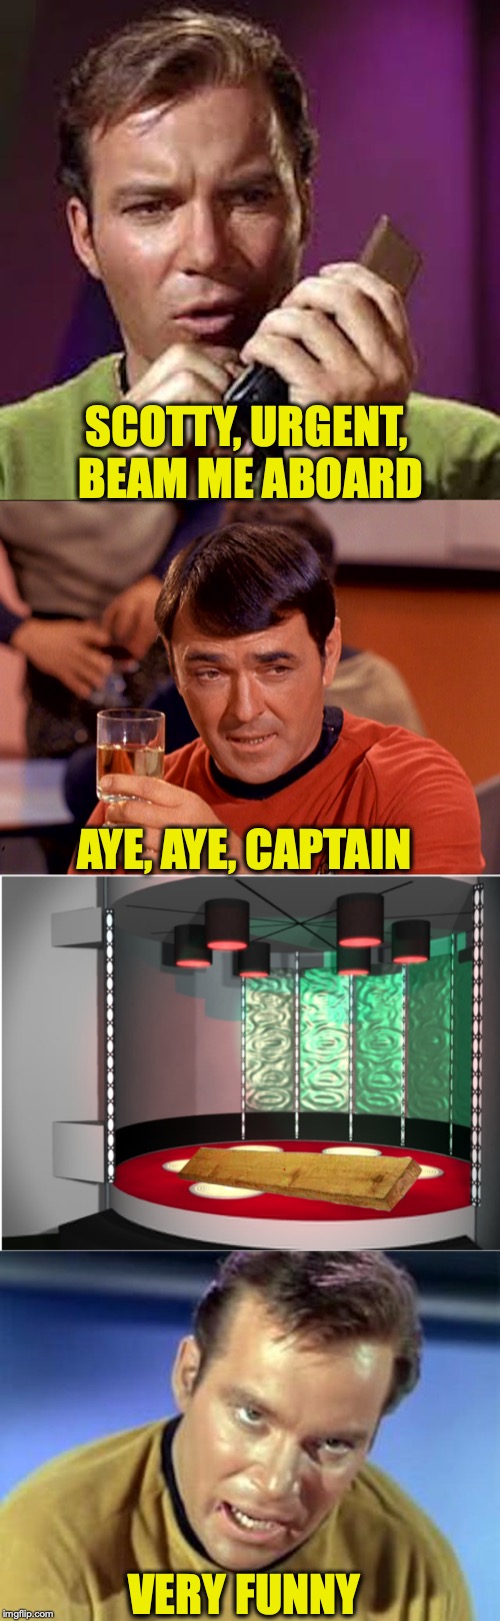 Somebody’s going to walk the plank |  SCOTTY, URGENT, BEAM ME ABOARD; AYE, AYE, CAPTAIN; VERY FUNNY | image tagged in bad pun,star trek,funny memes,star trek scotty | made w/ Imgflip meme maker